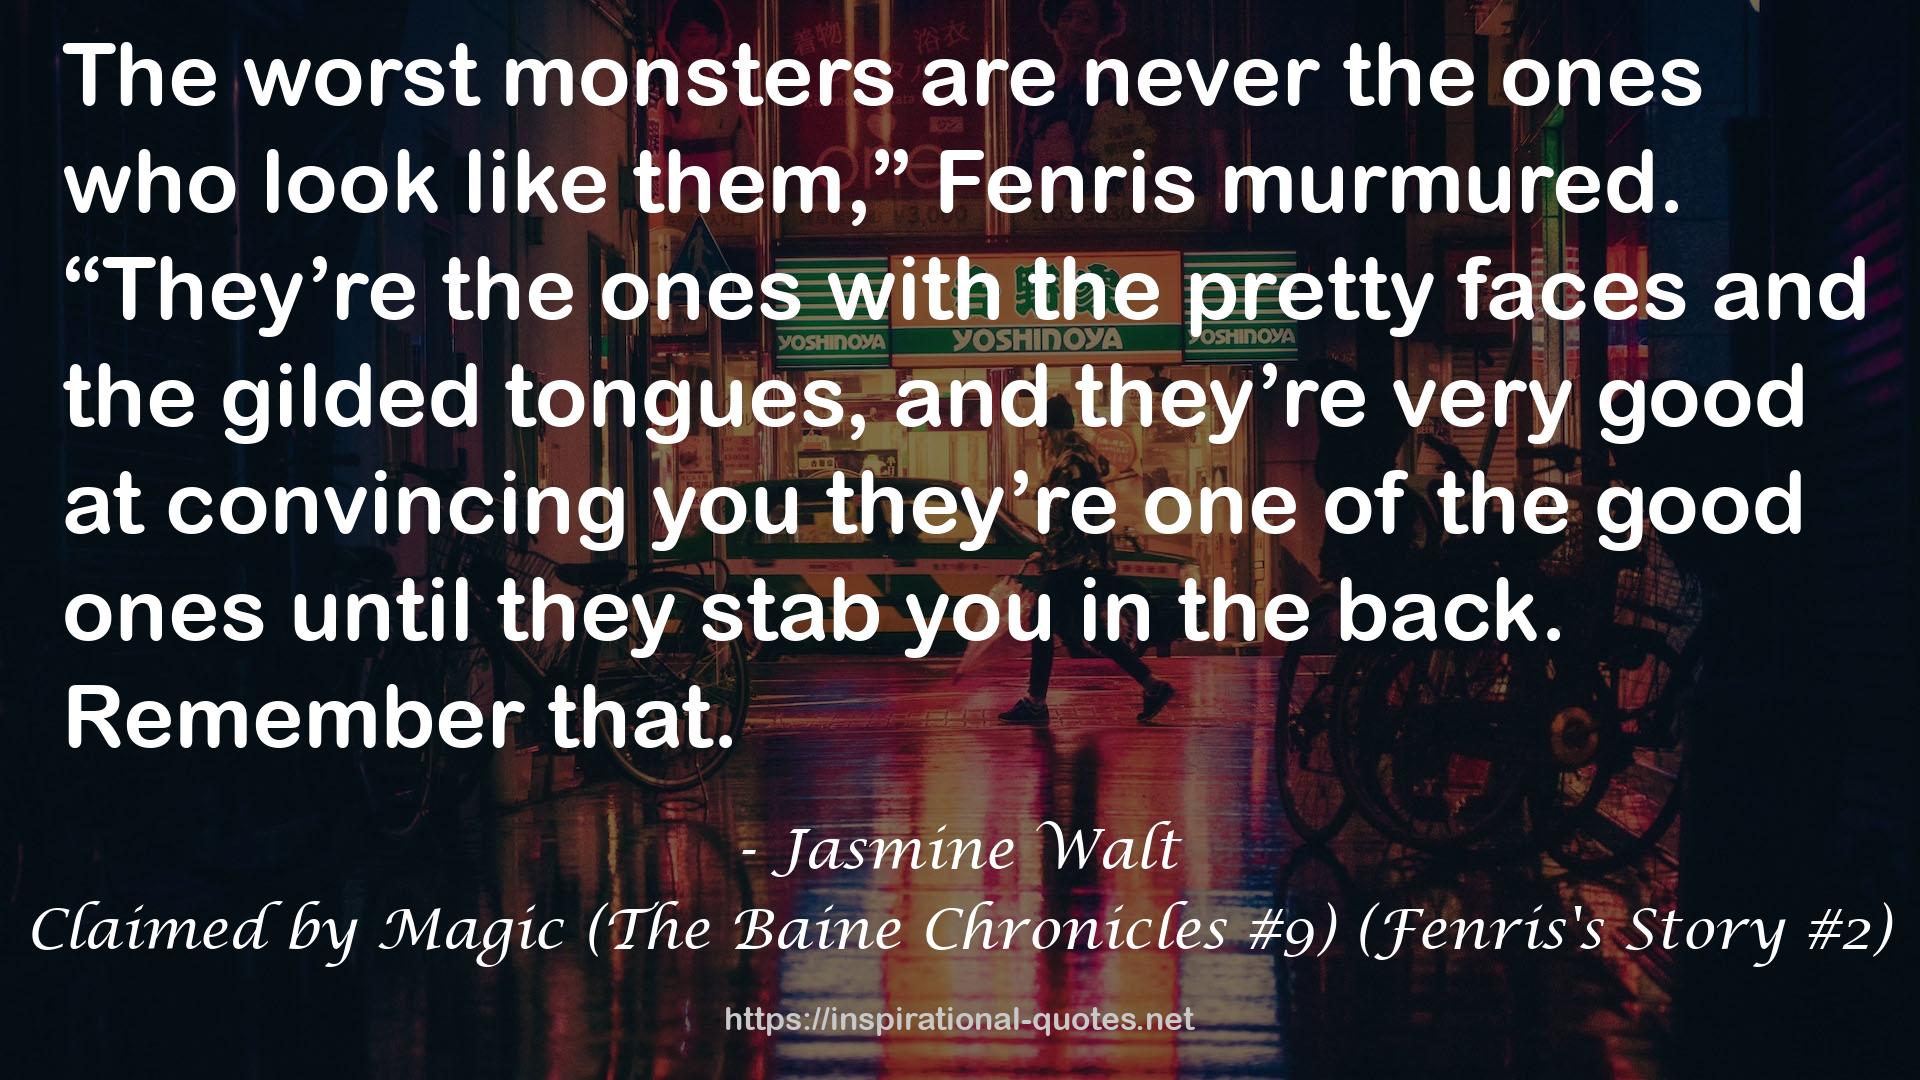 Claimed by Magic (The Baine Chronicles #9) (Fenris's Story #2) QUOTES